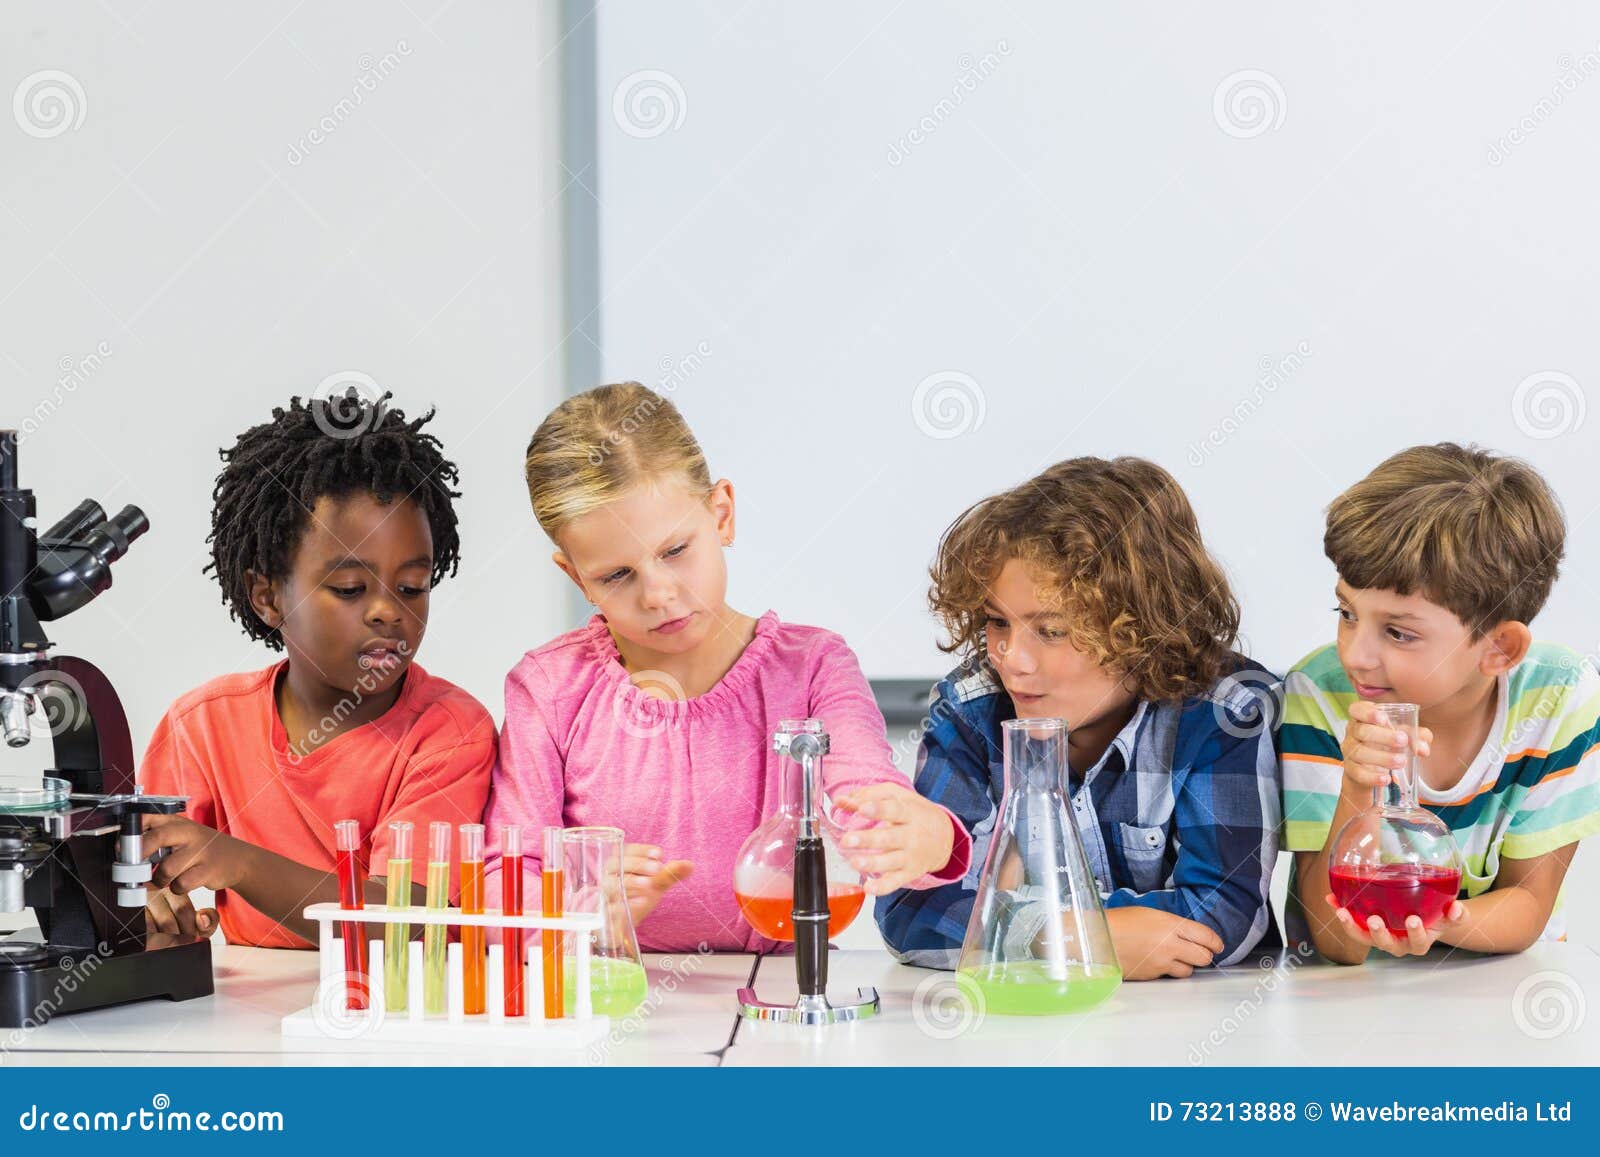 kids doing a chemical experiment in laboratory